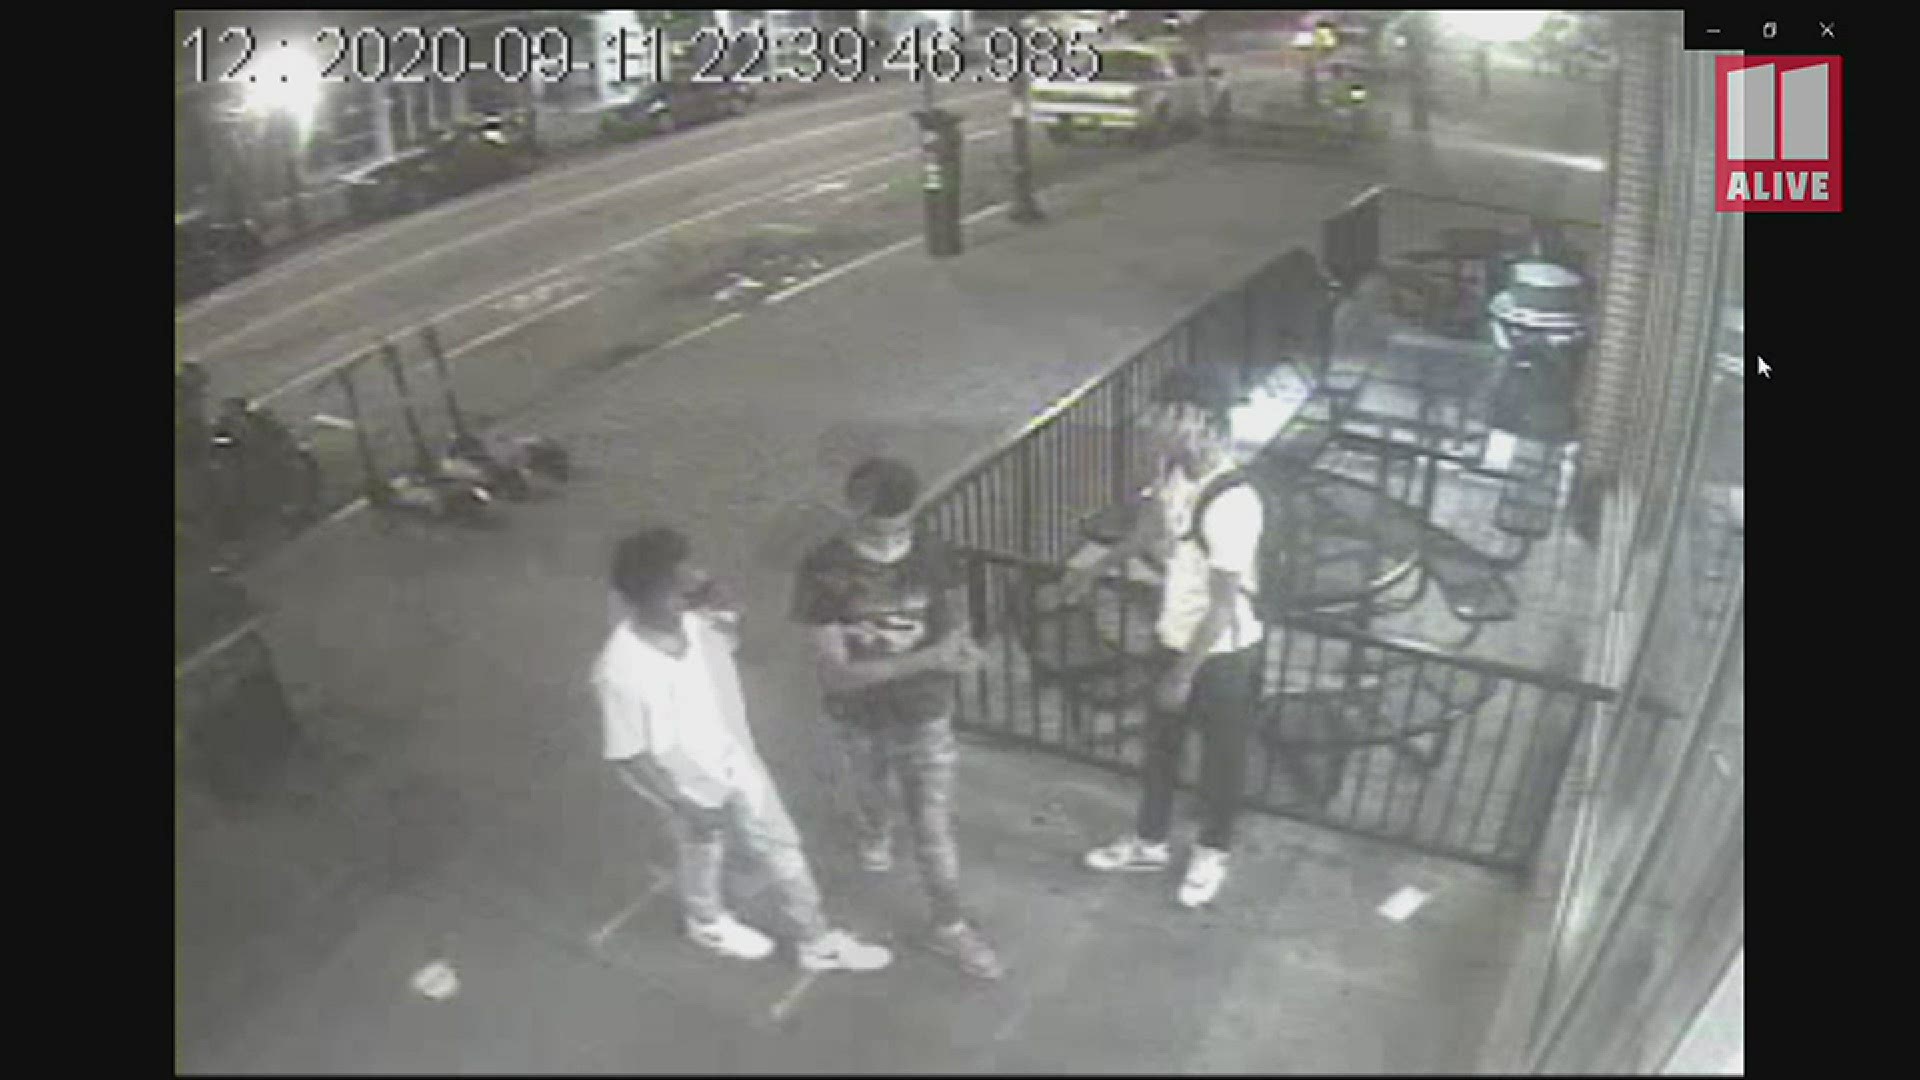 Police are looking for three males who they said shot at two others outside a business on 5th Street, N. W., on Friday evening, Sept. 11, 2020.